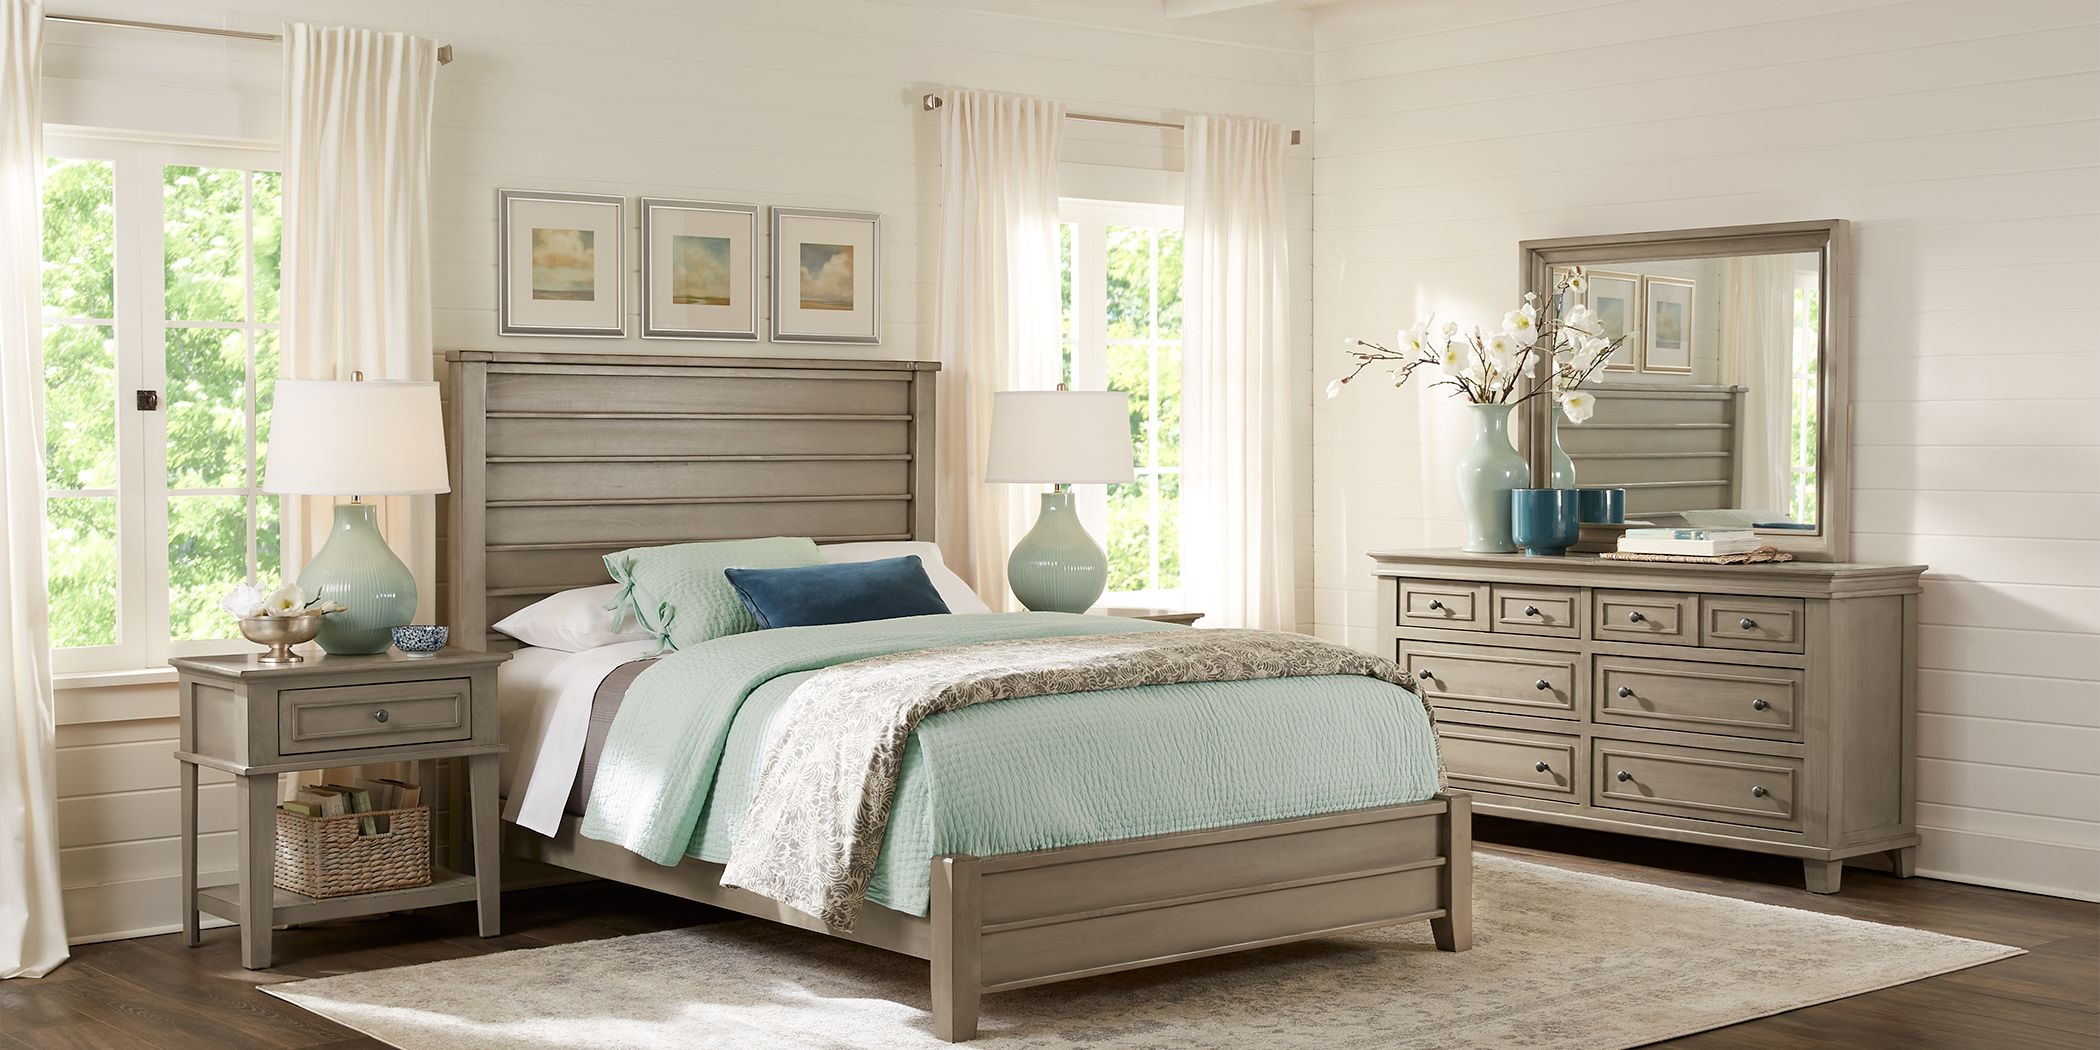 Storage Queen Size Beds Frames, Hillary Queen Bookcase Bed With Underbed Storage Drawers